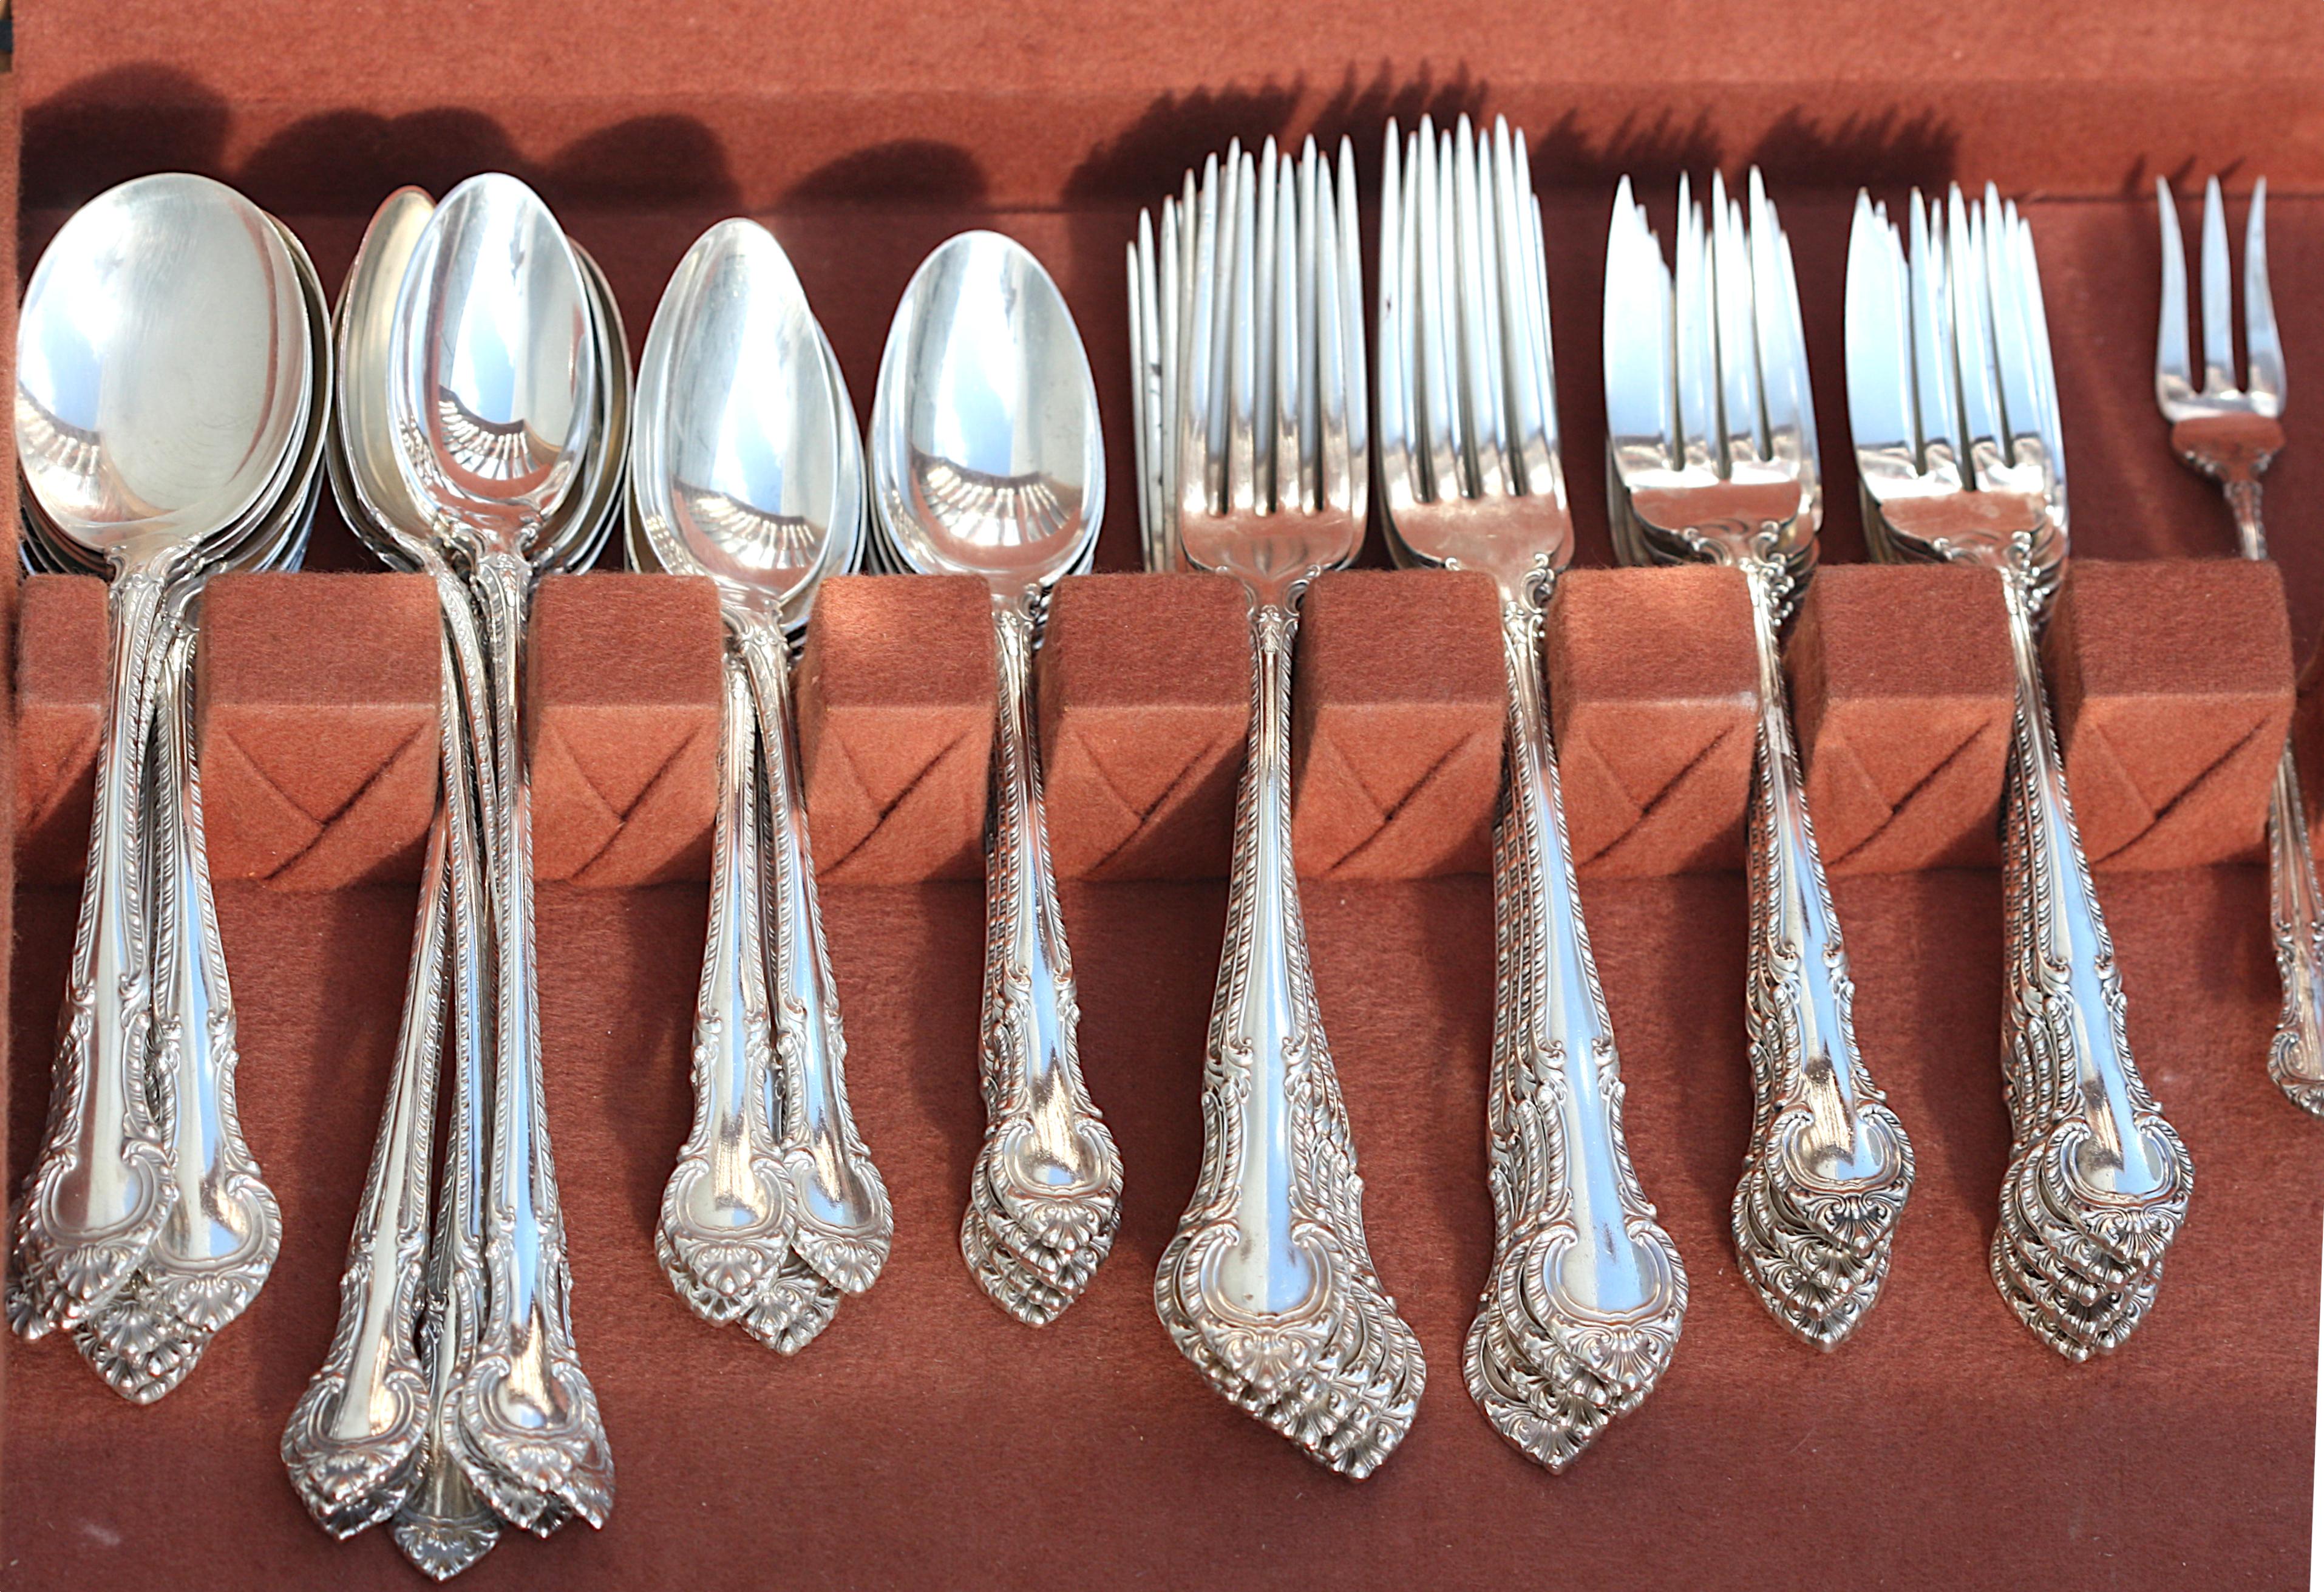 Gorham Sterling Silver Ninety-One Piece Flatware Service In Good Condition For Sale In West Palm Beach, FL